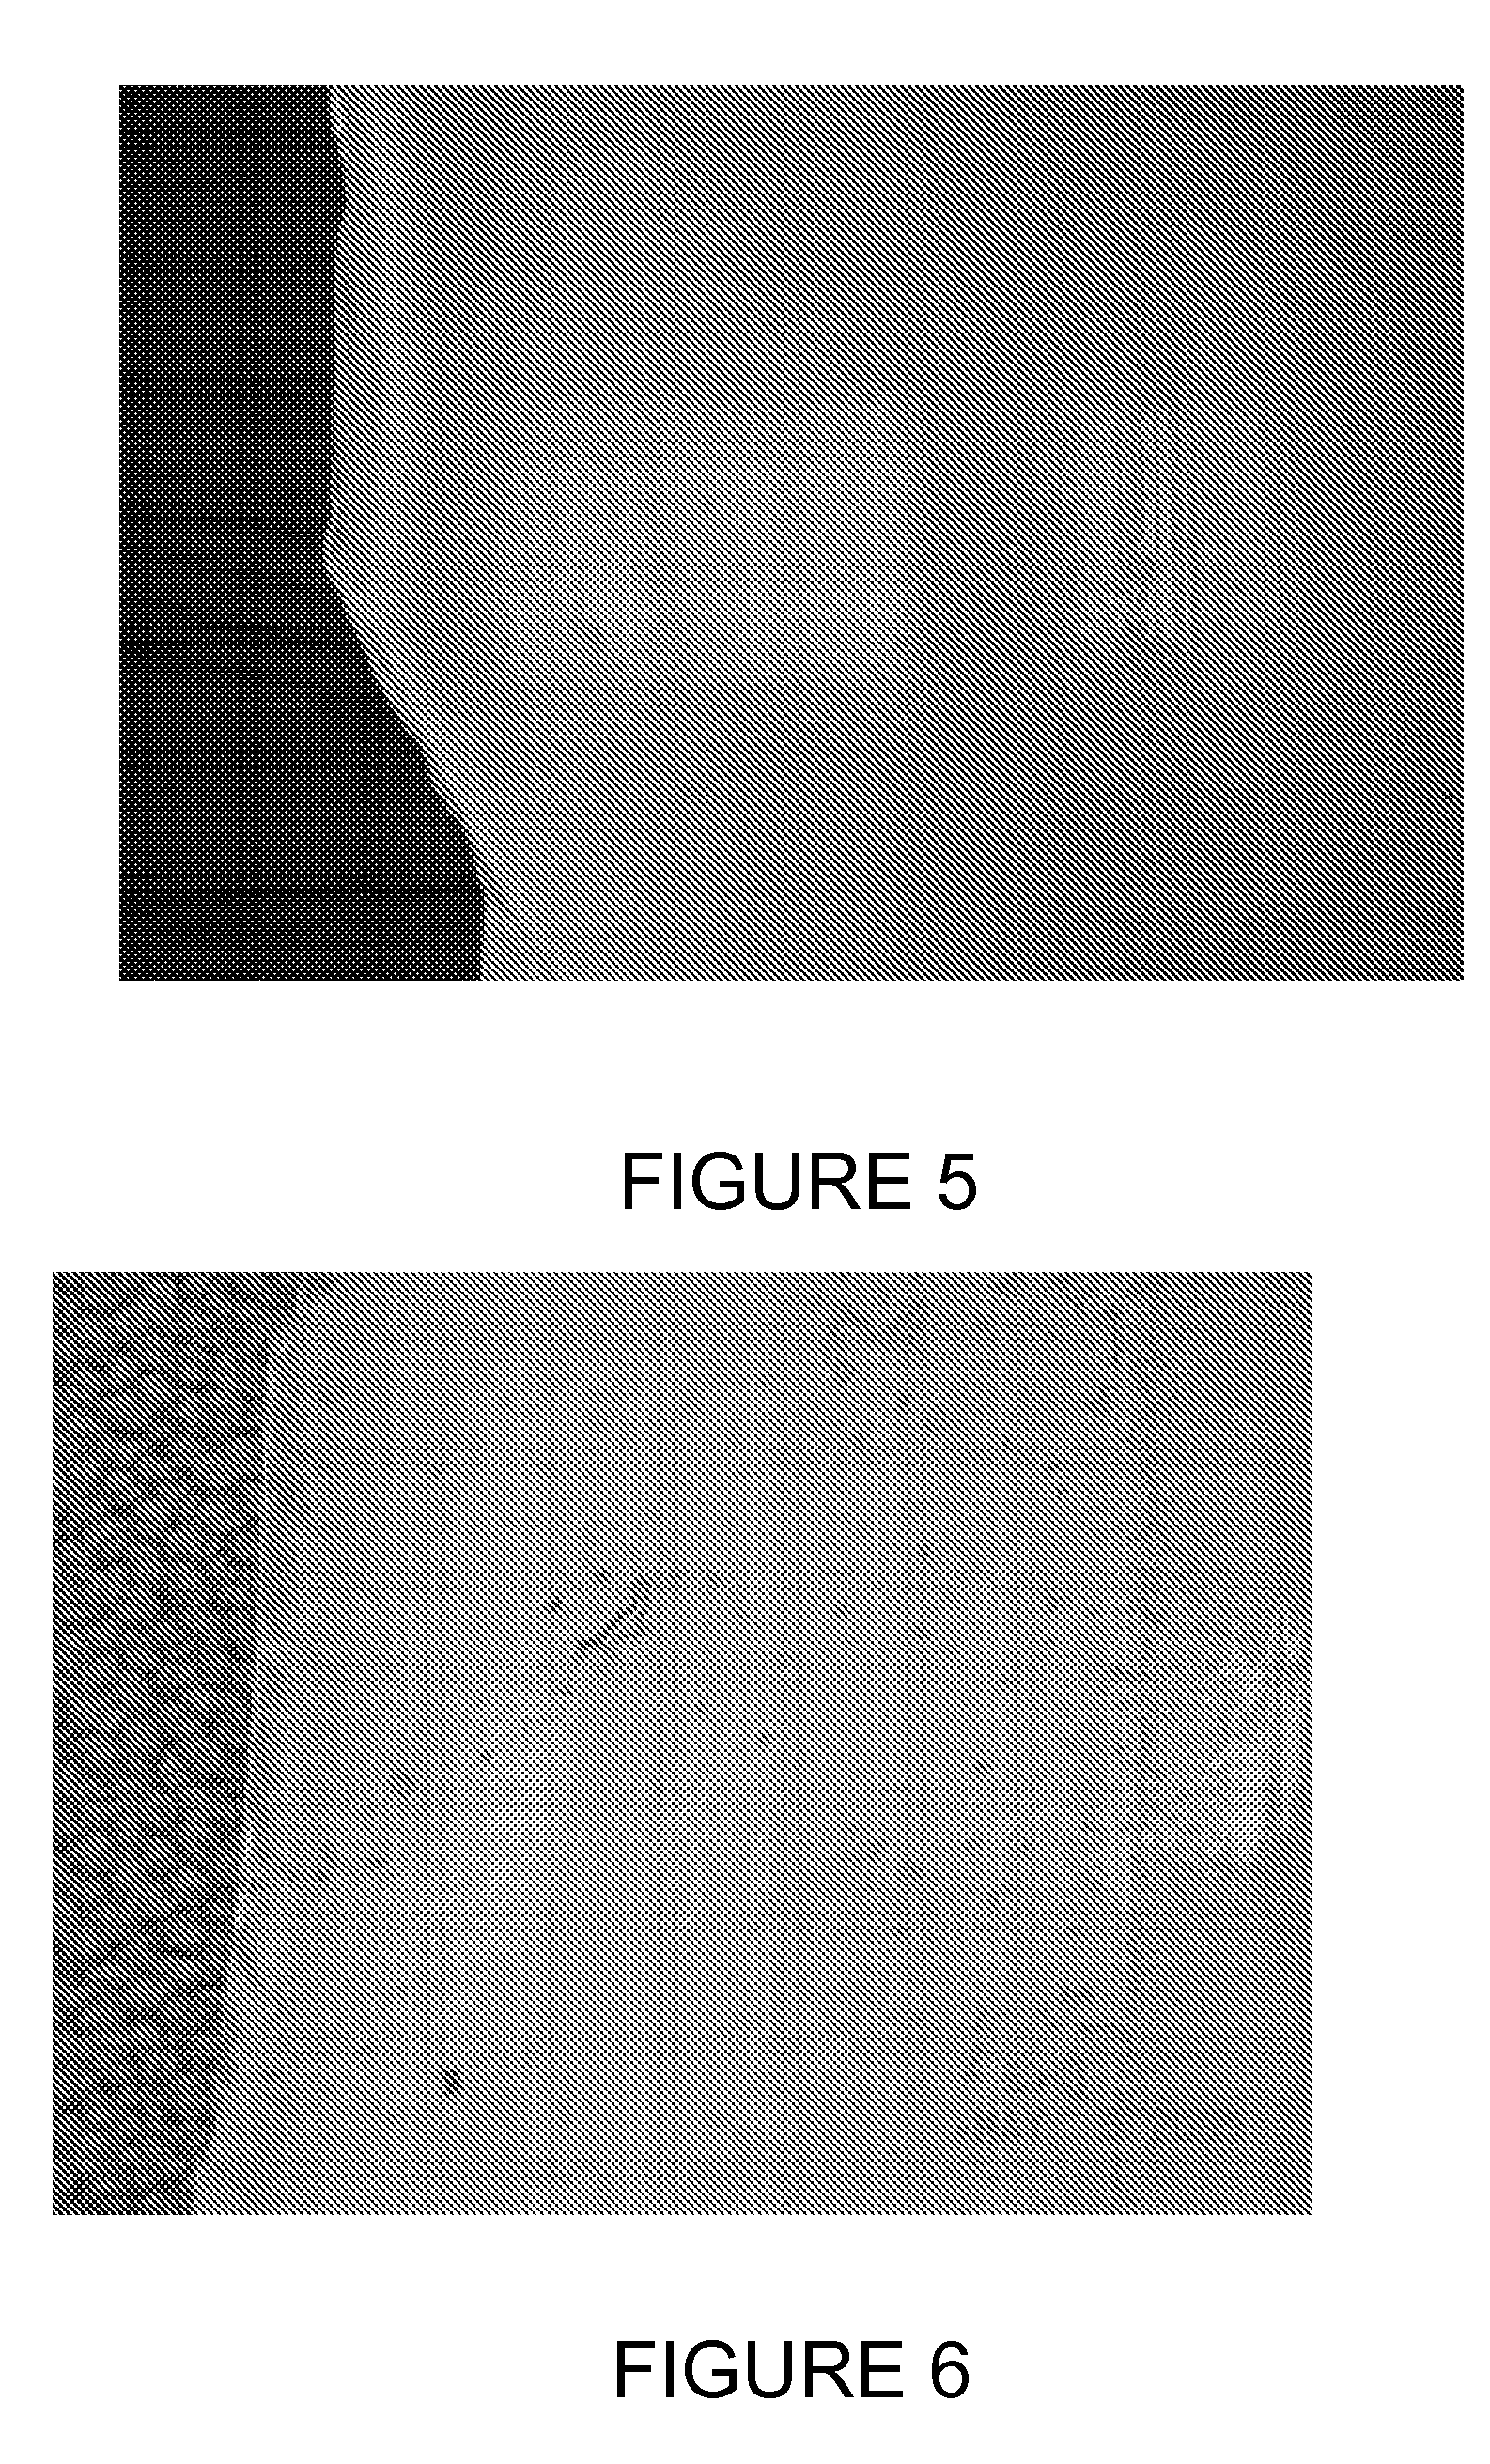 Quartz glass crucible and method for treating surface of quartz glass crucible